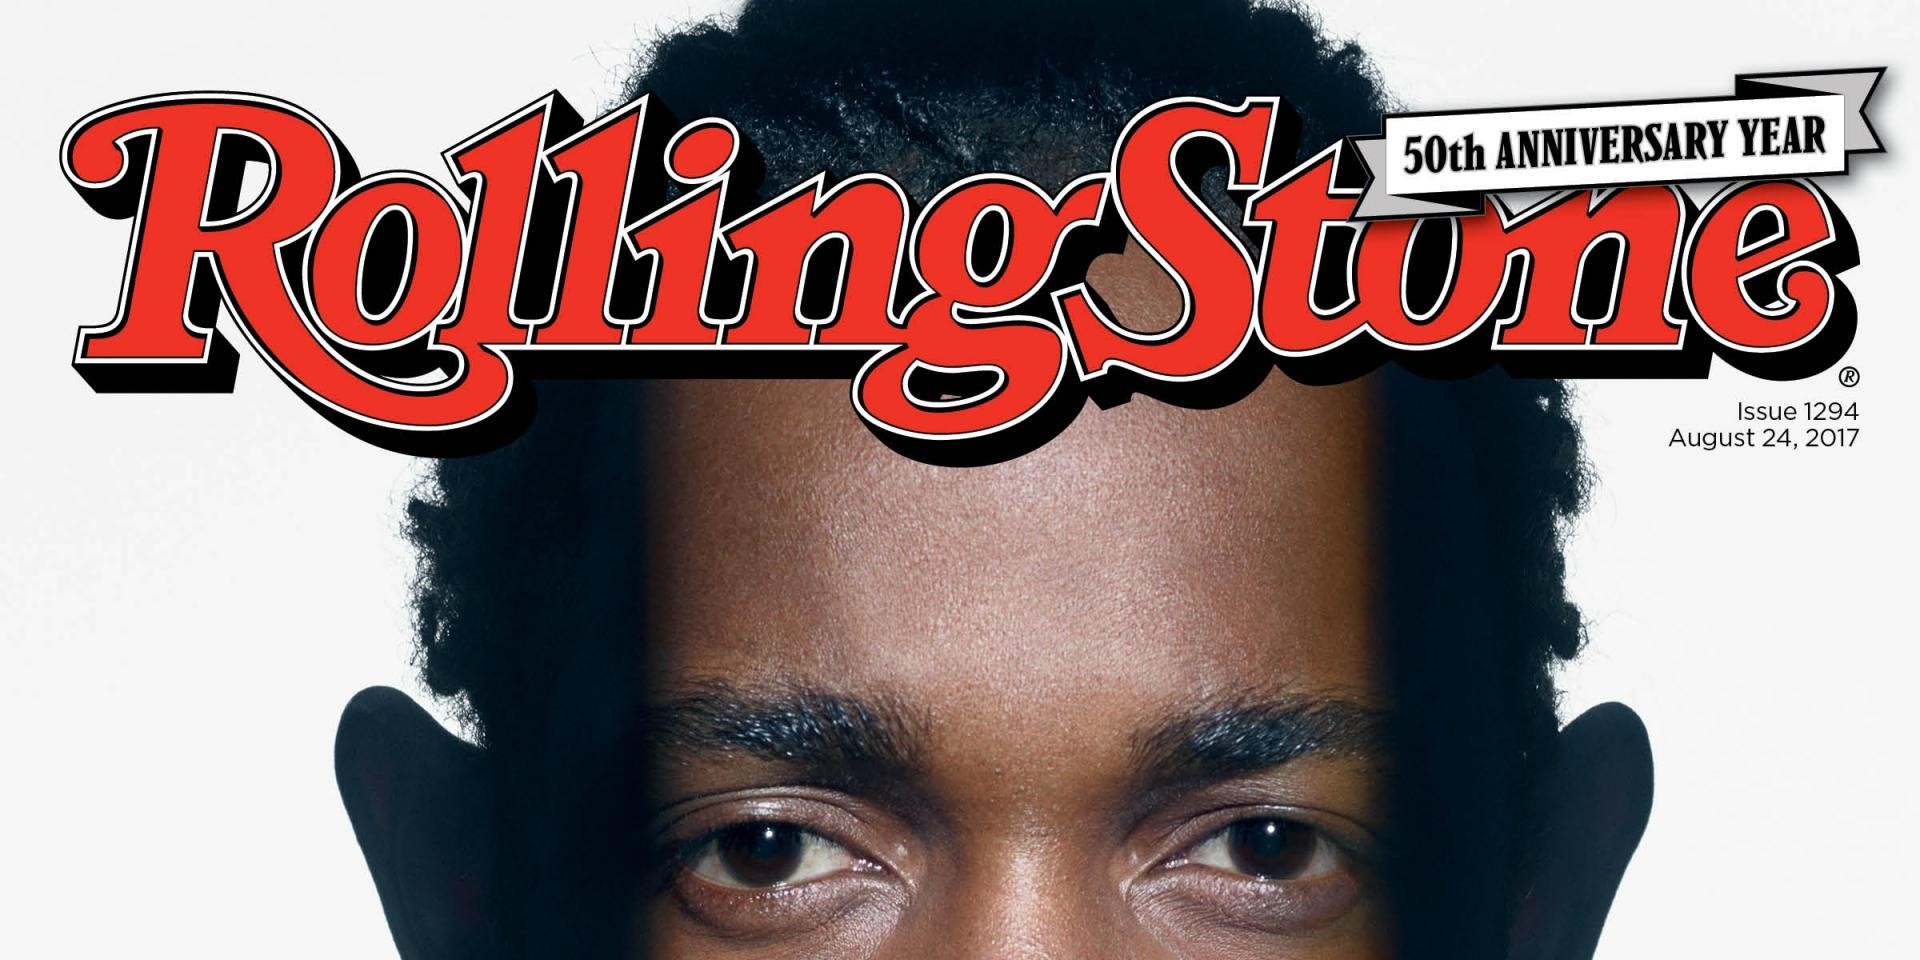 Rolling Stone will launch its own music charts to rival Billboard's